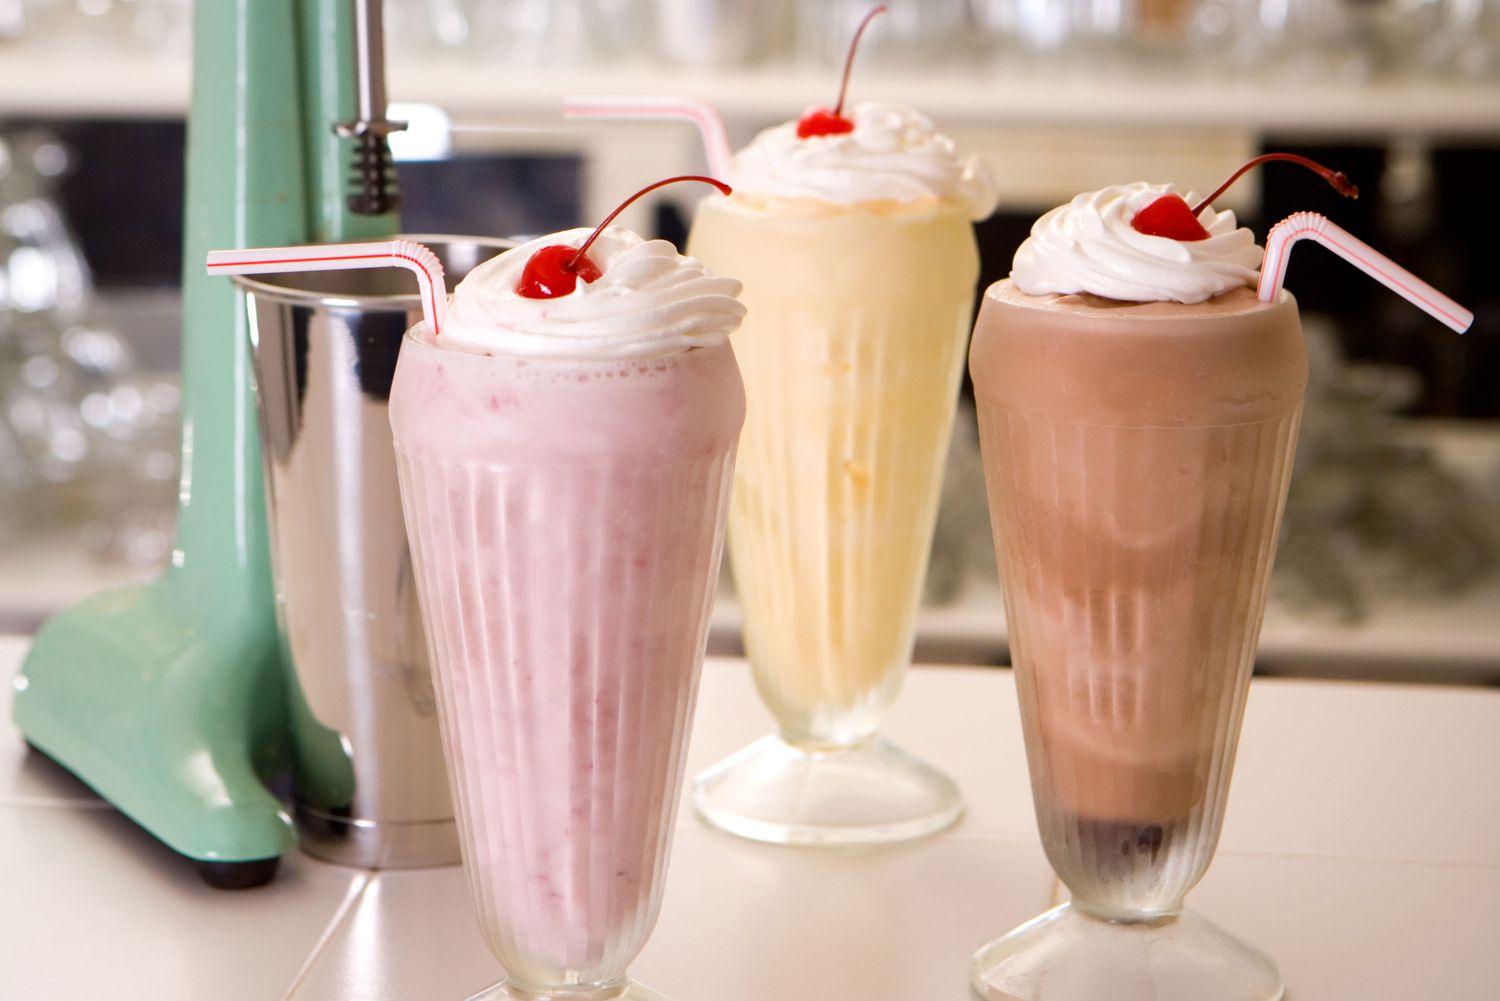 Three die after drinking milkshakes contaminated with listeria in Washington